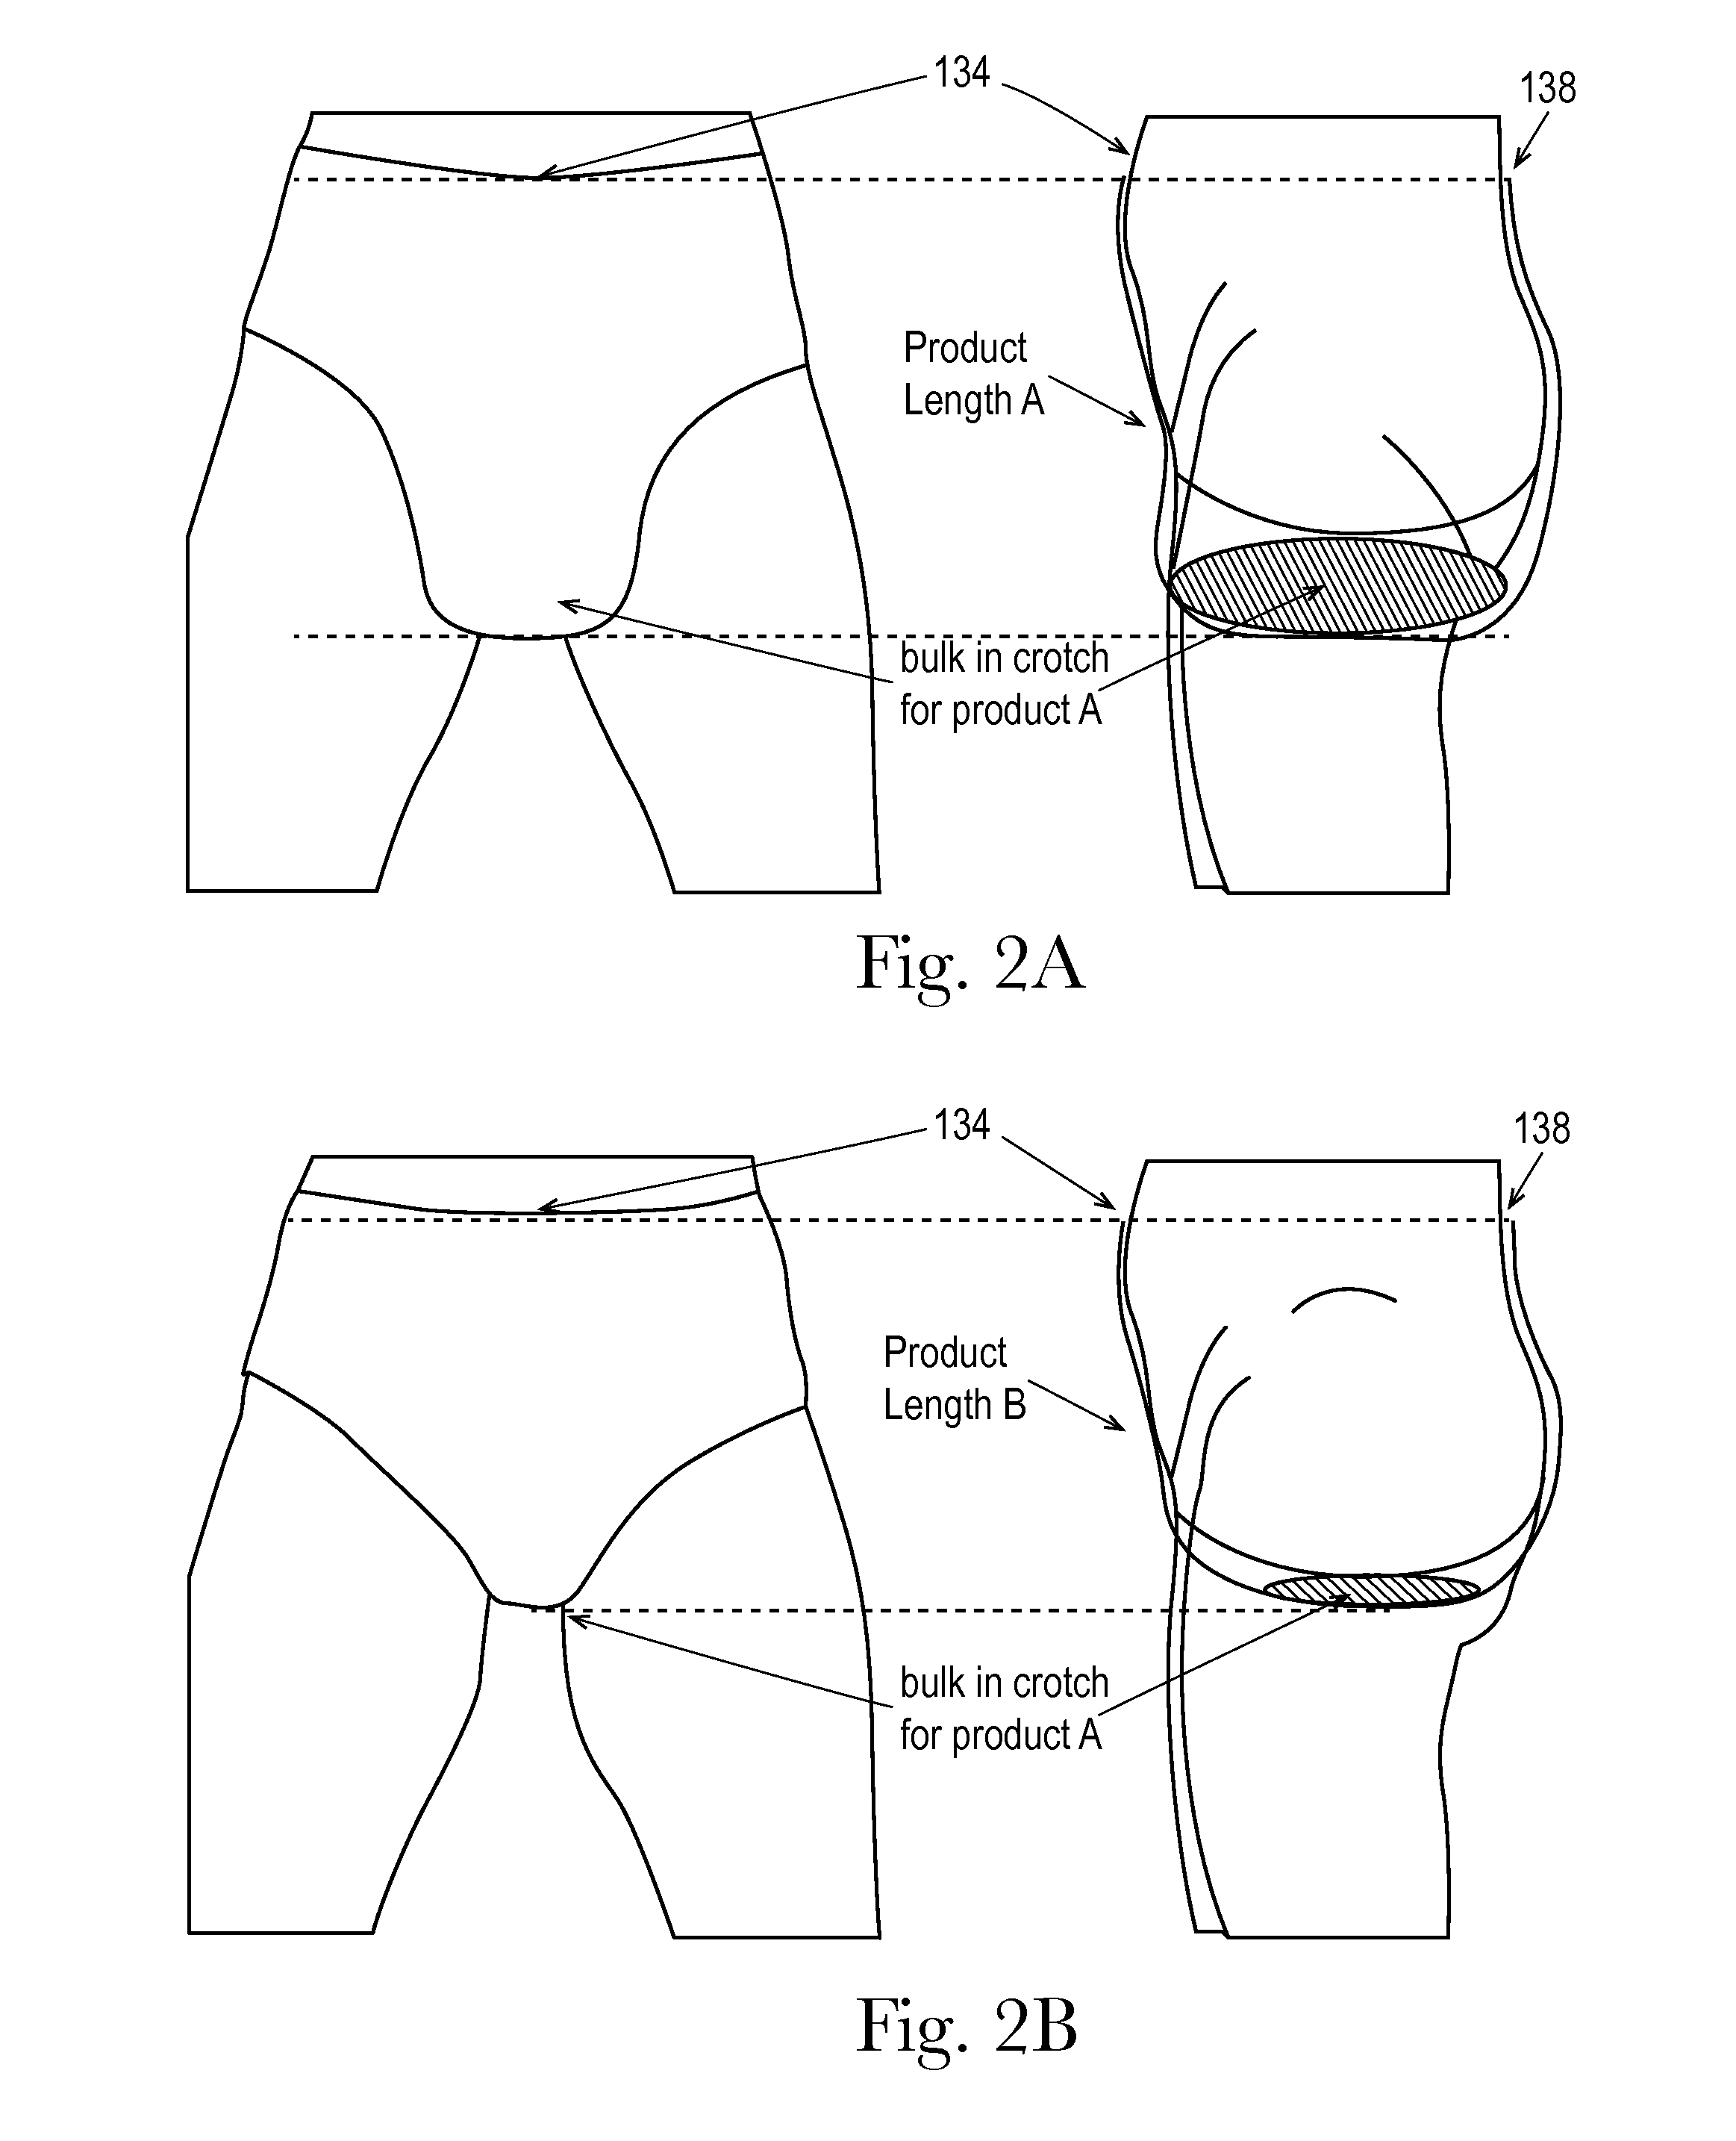 Adult disposable absorbent articles and arrays comprising improved product lengths